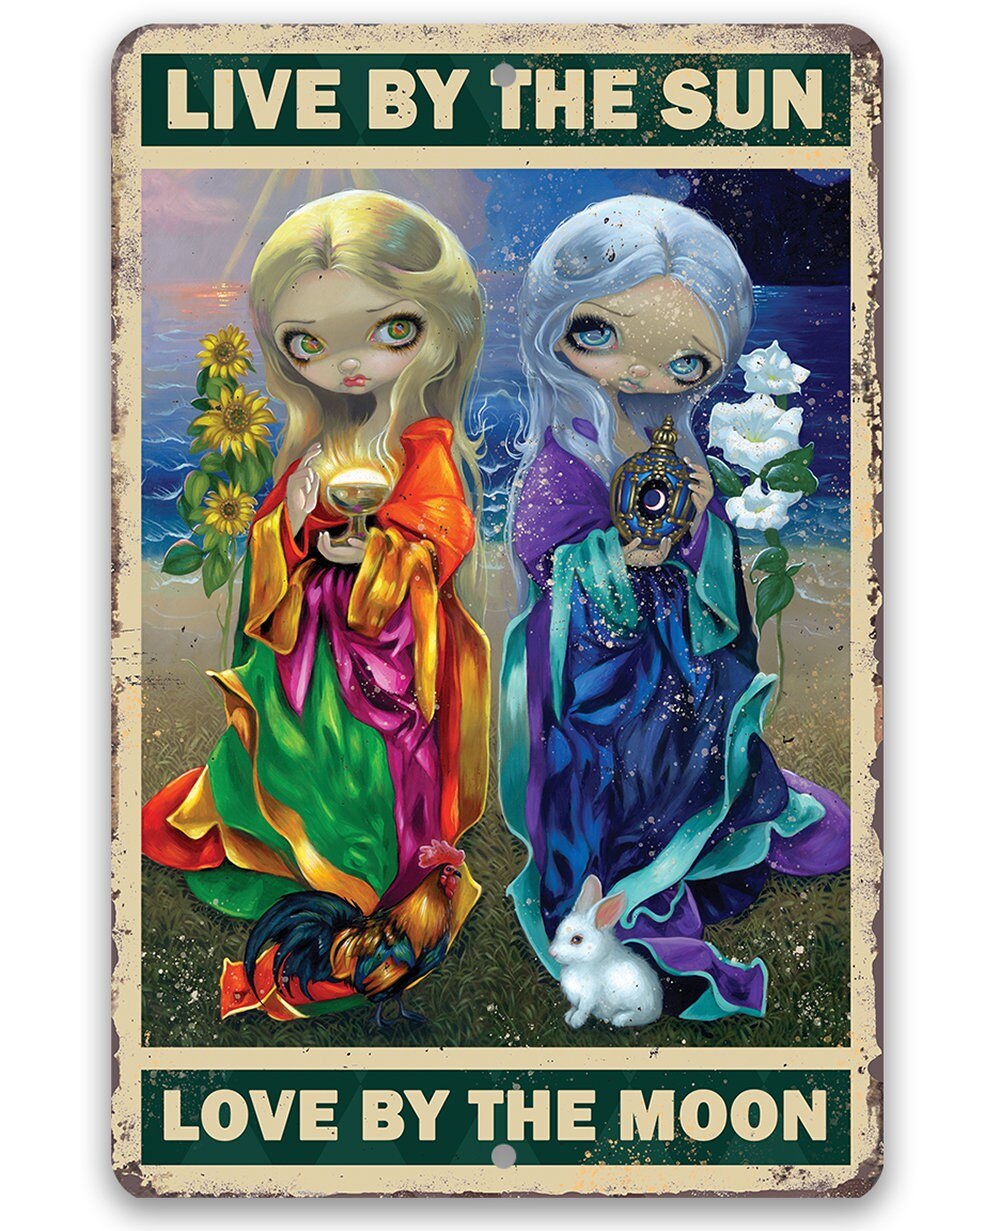 Live By The Sun - 8" x 12" or 12" x 18" Aluminum Tin Awesome Gothic Metal Poster Lone Star Art 